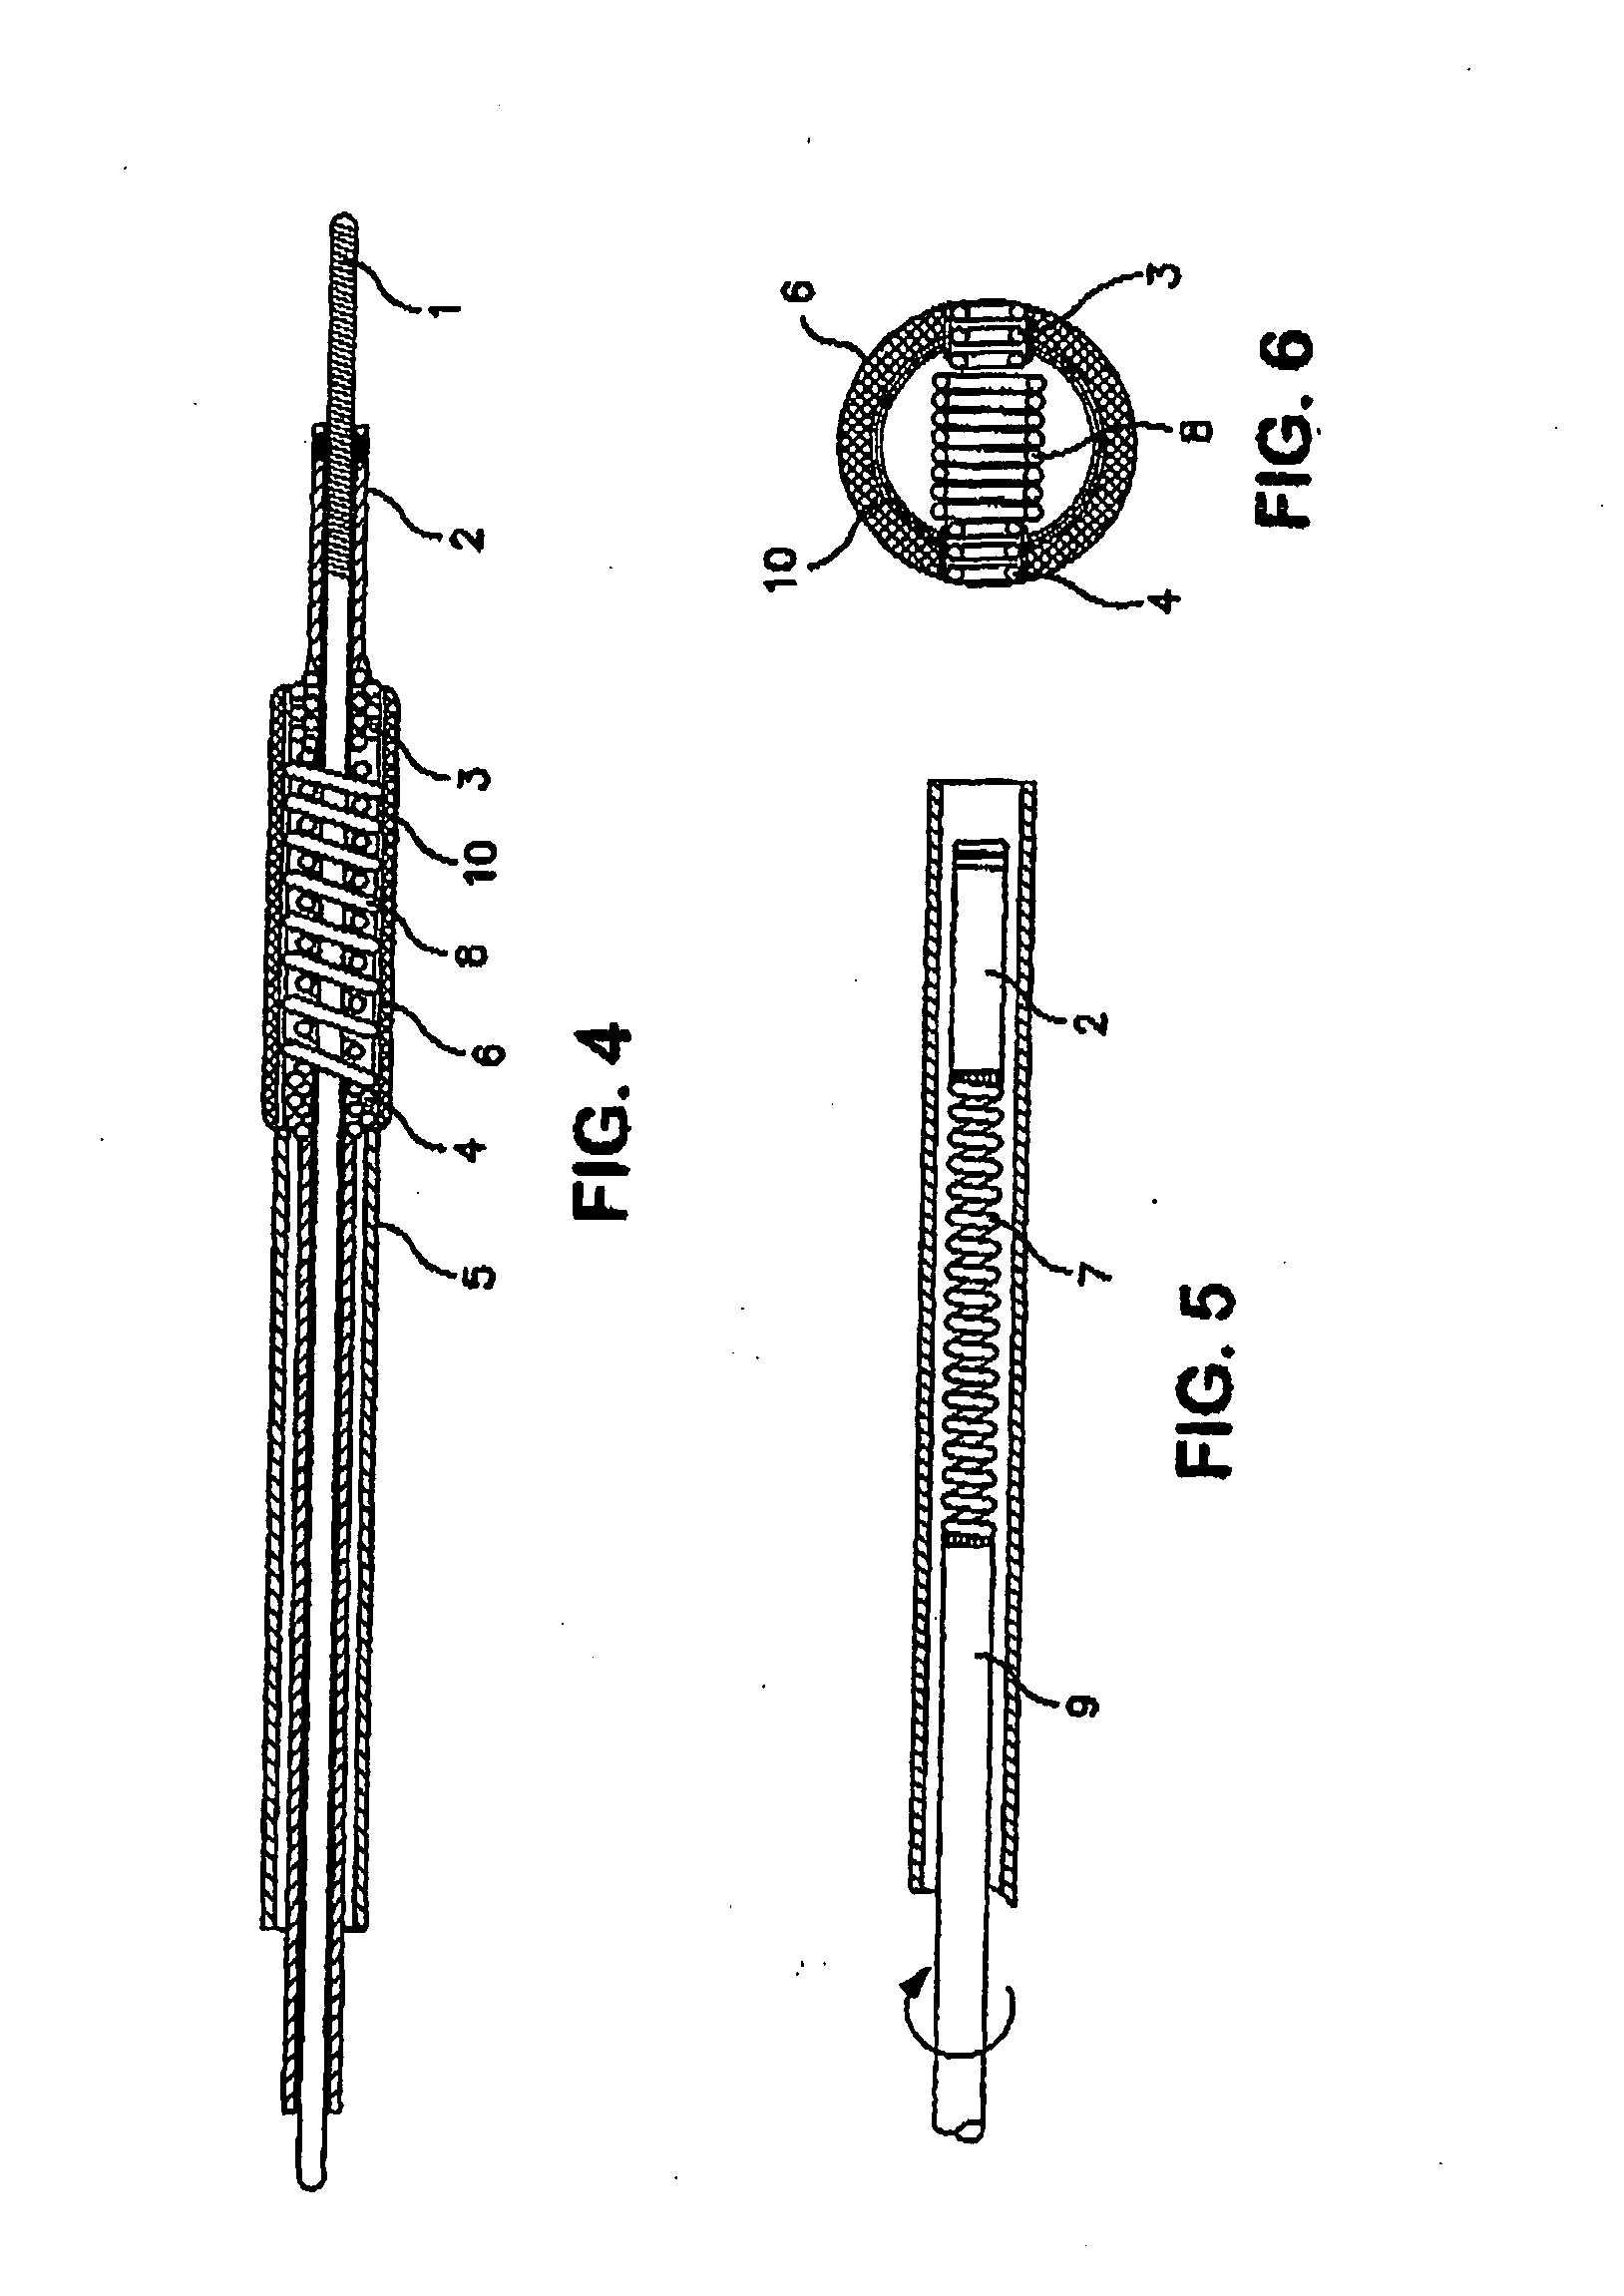 Self-Expandable Endovascular Device For Aneurysm Occlusion